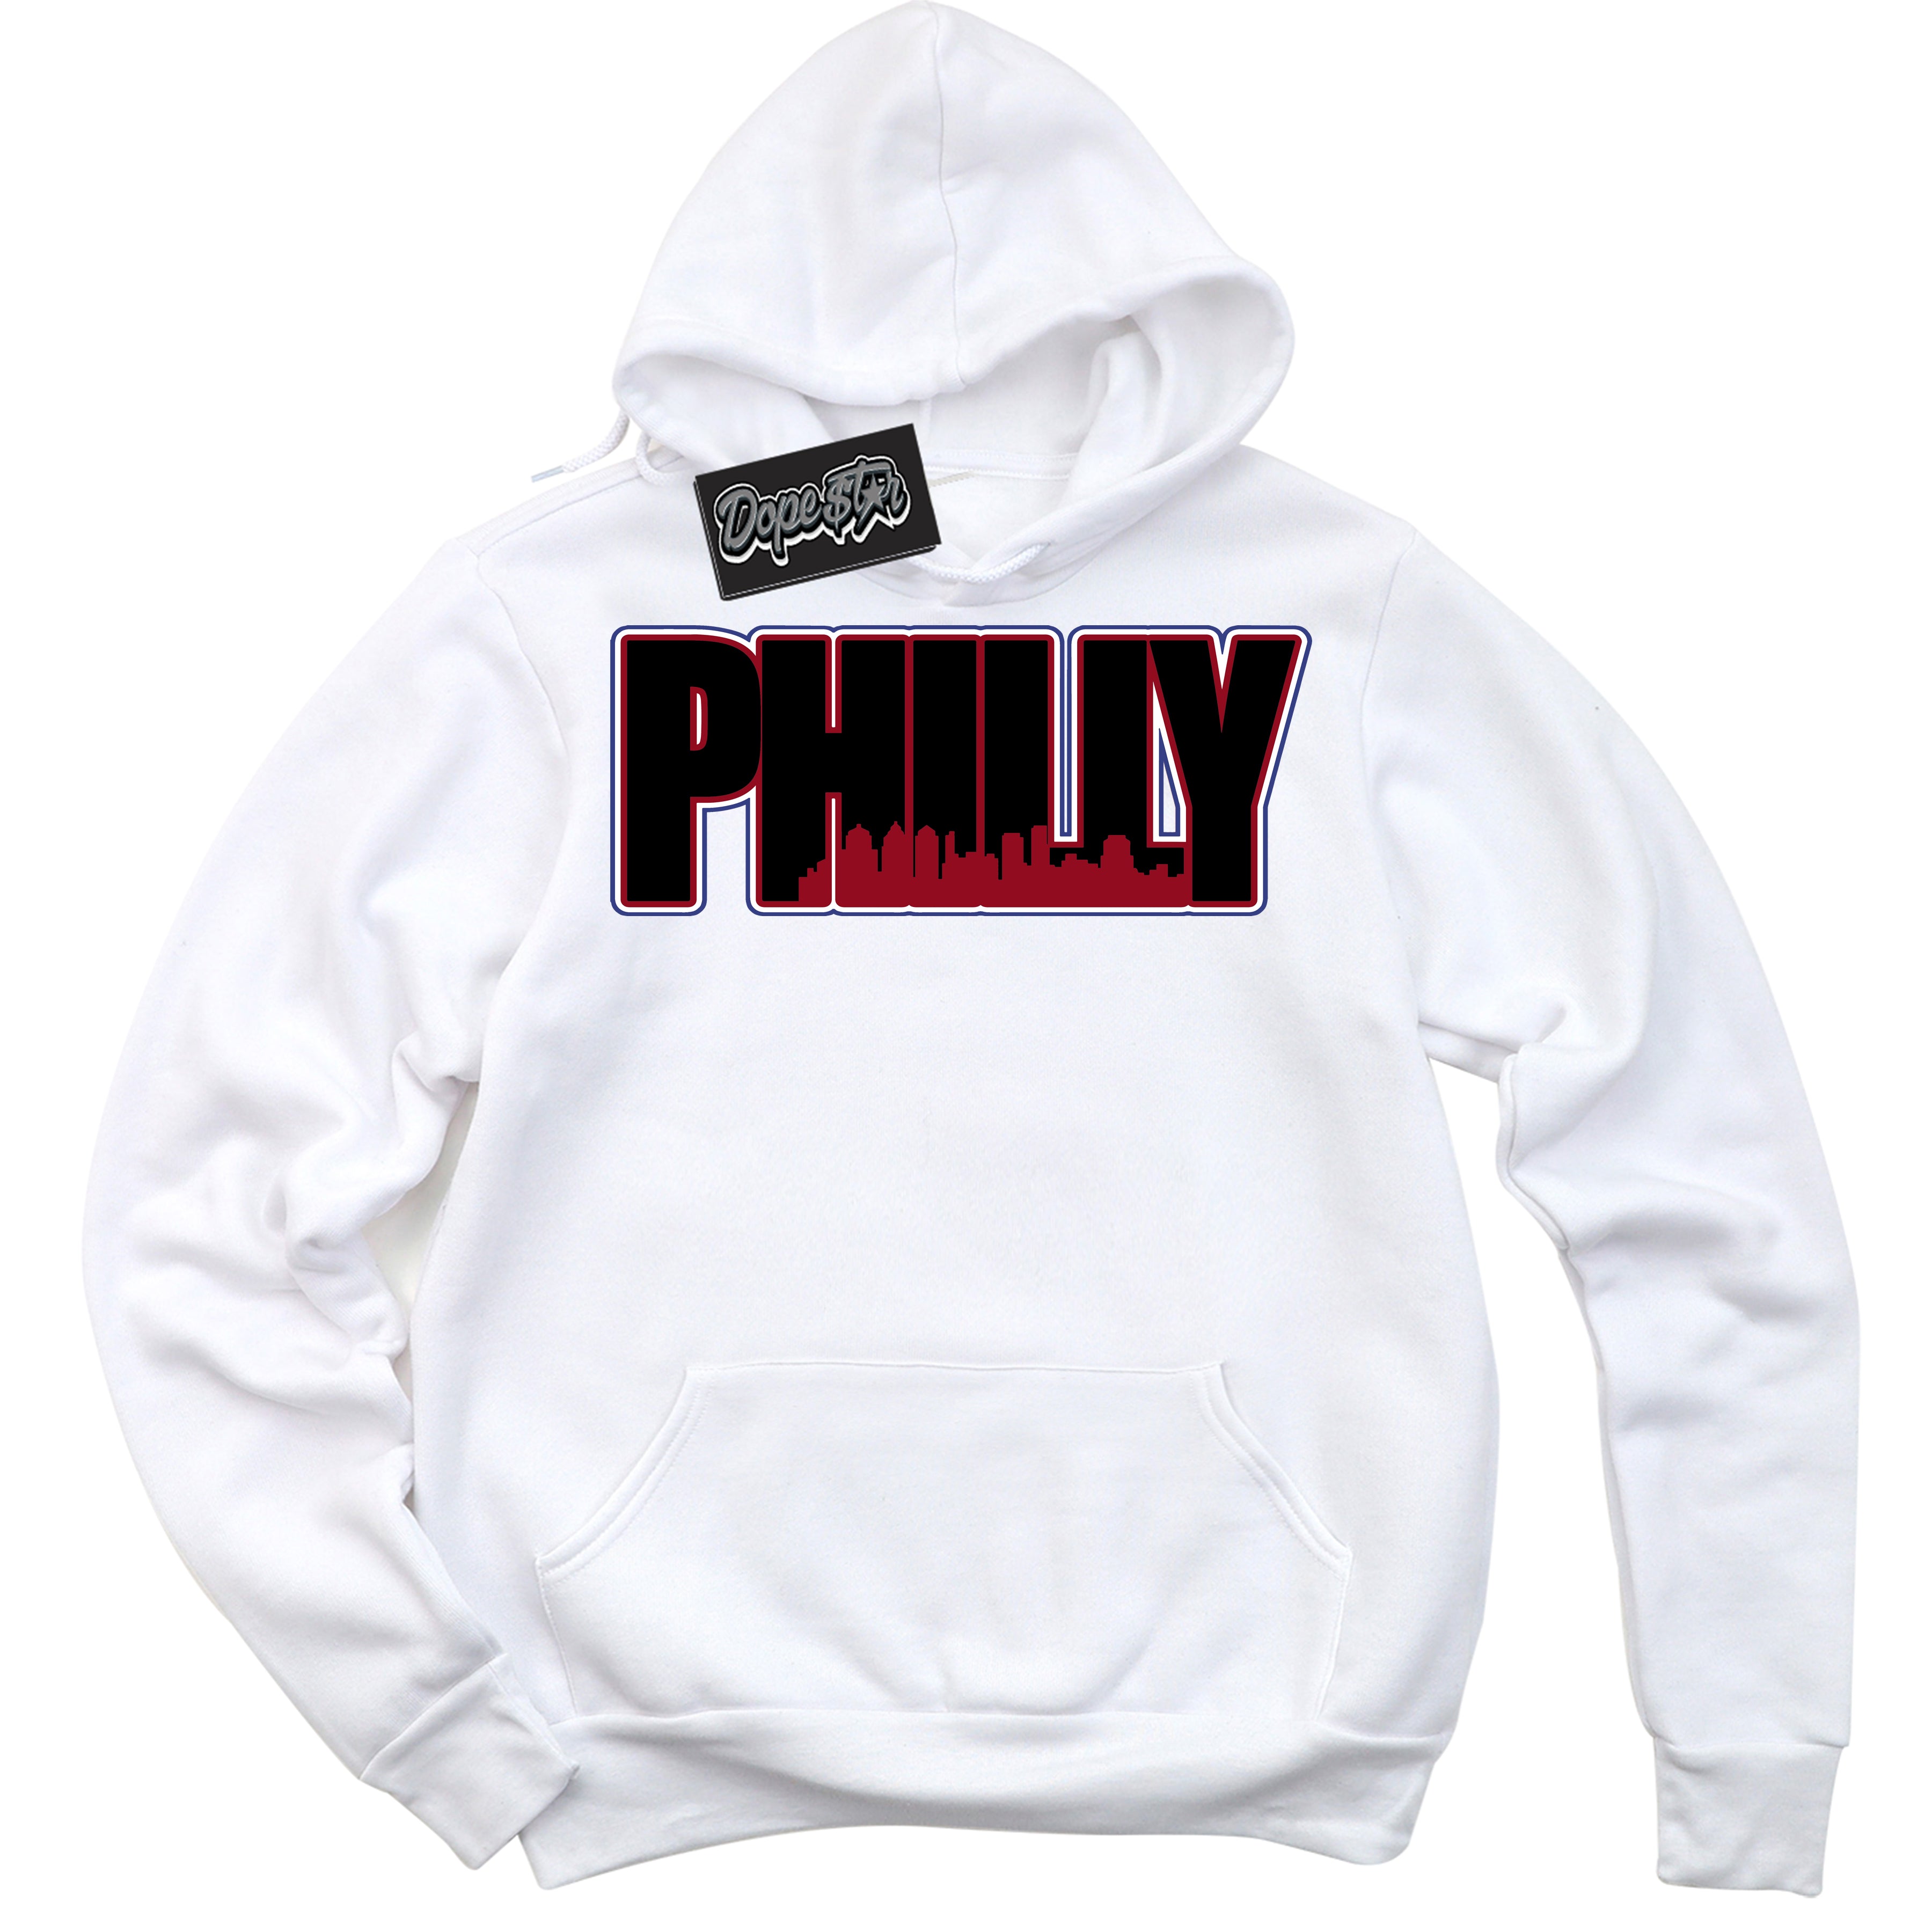 Cool White Hoodie with “ Philly ”  design that Perfectly Matches Playoffs 8s Sneakers.